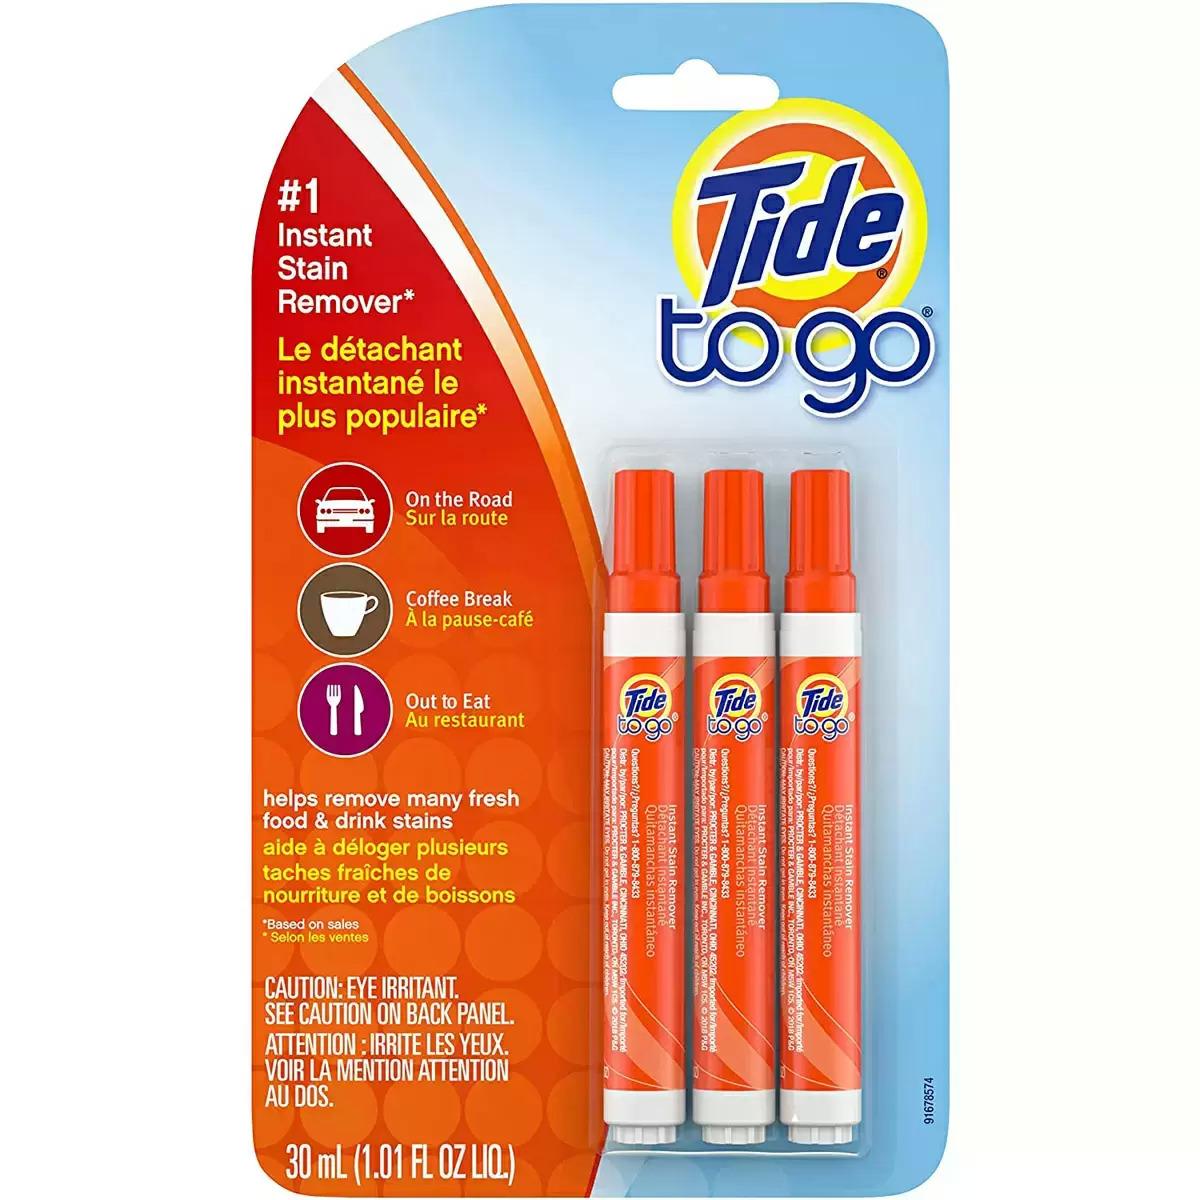 3 Tide To Go Instant Stain Remover Liquid Pen for $4.90 Shipped